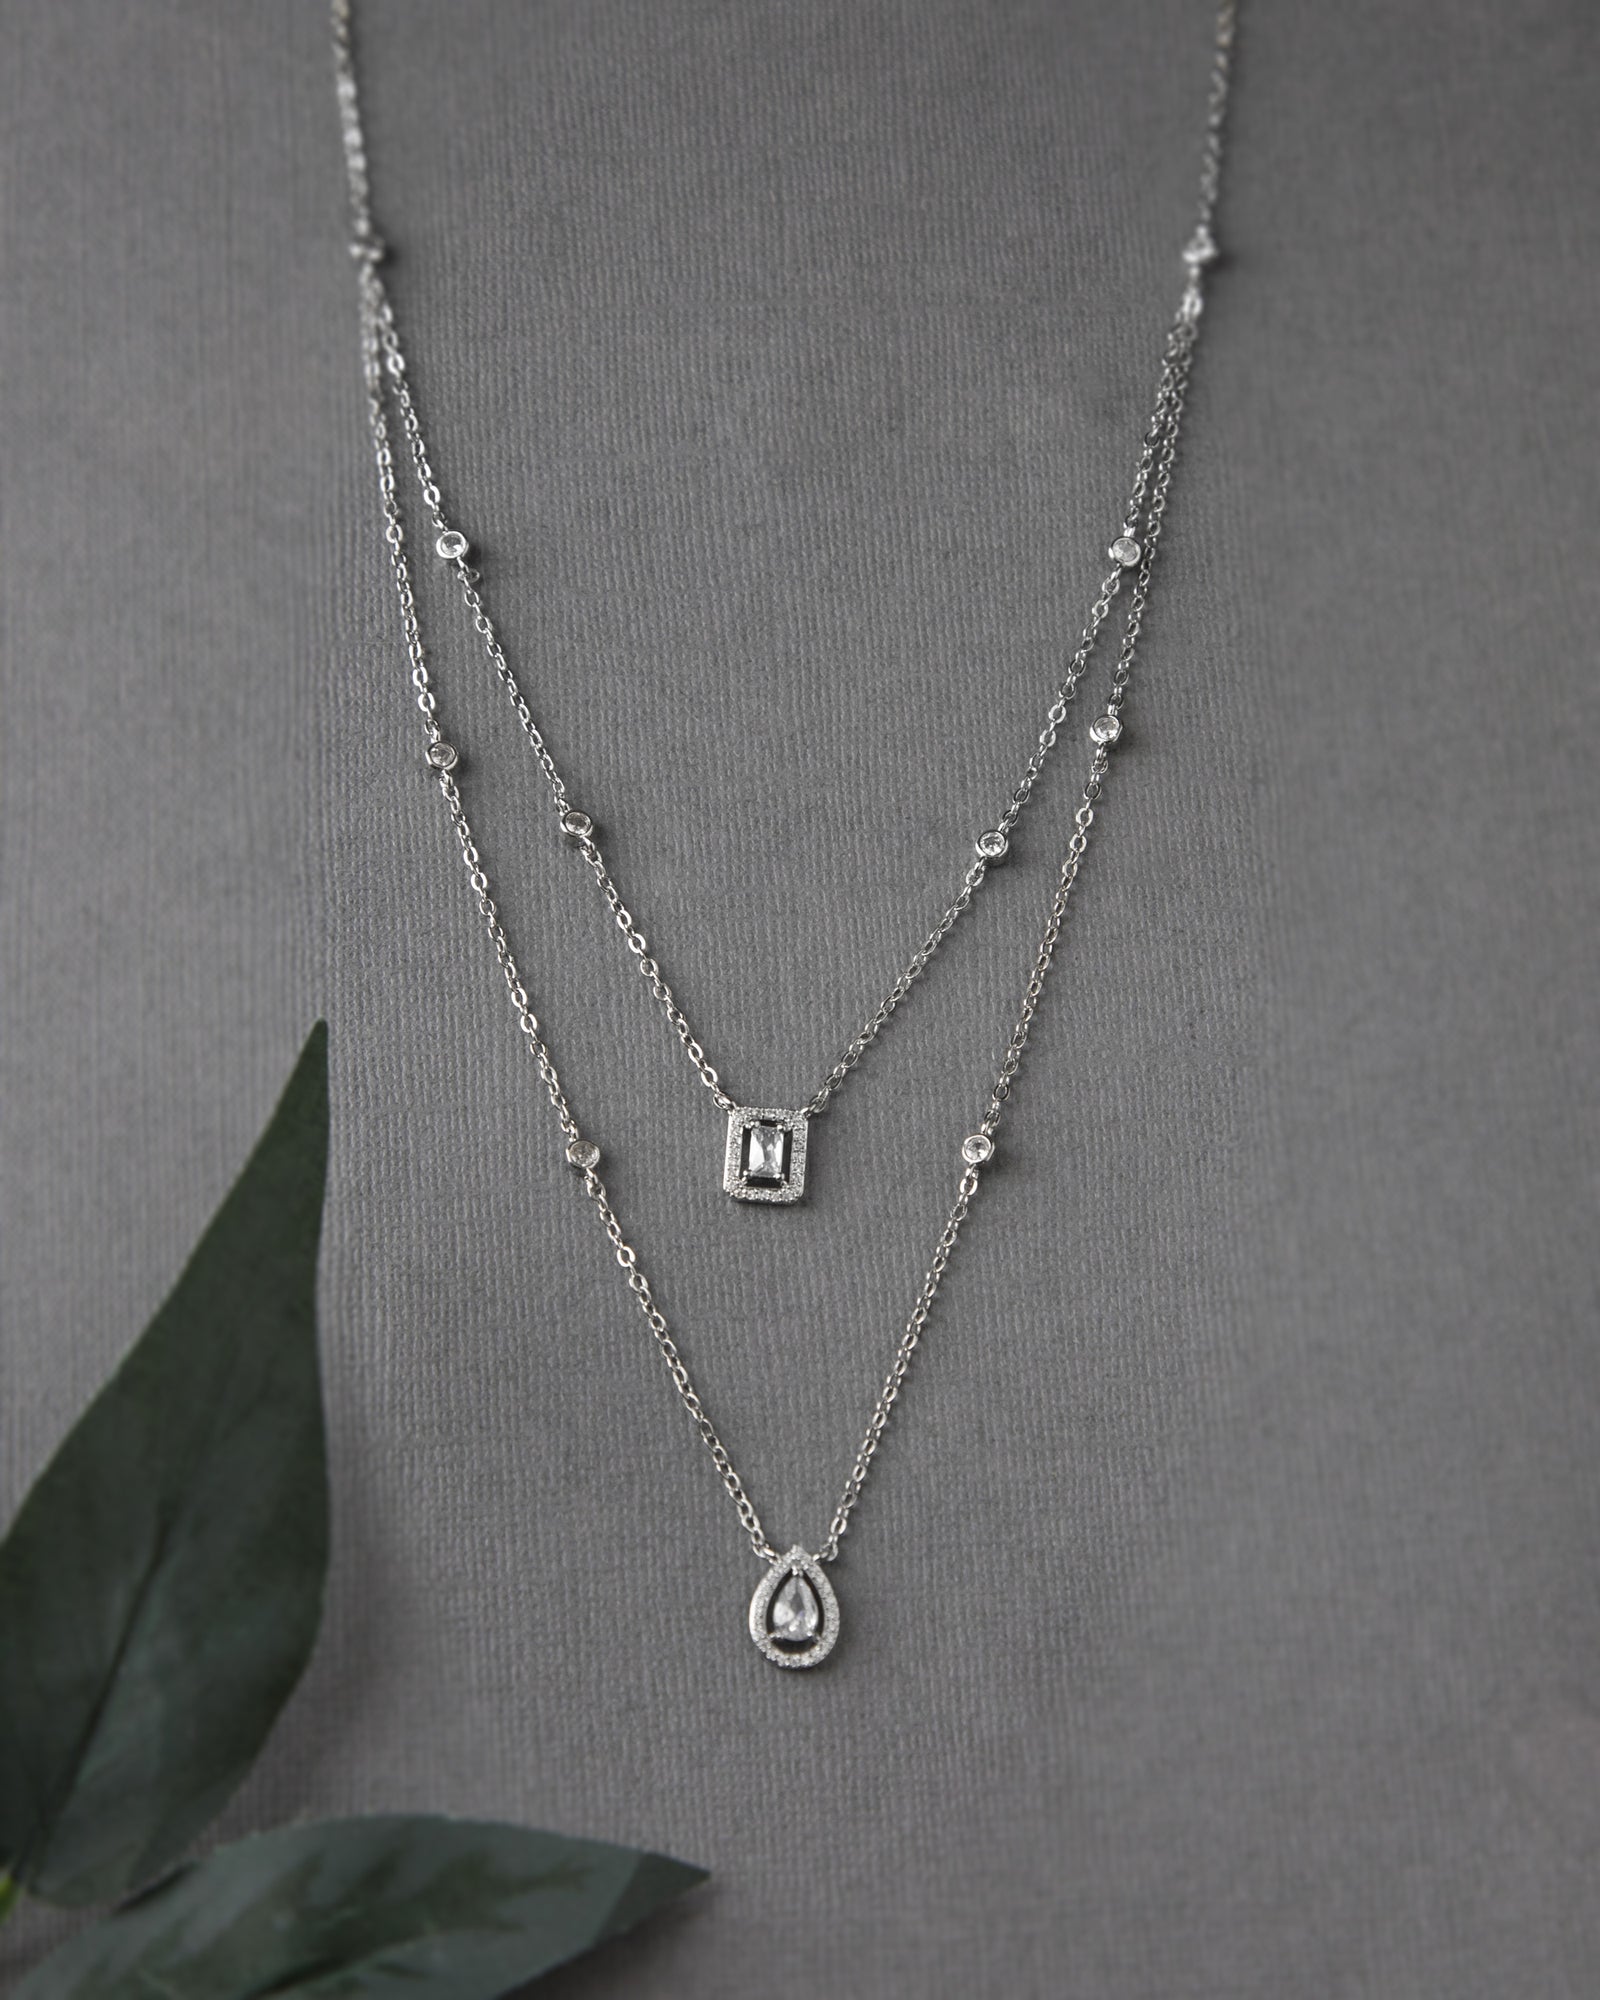 Simple Layered Necklace with CZ Stones - Cassandra Lynne